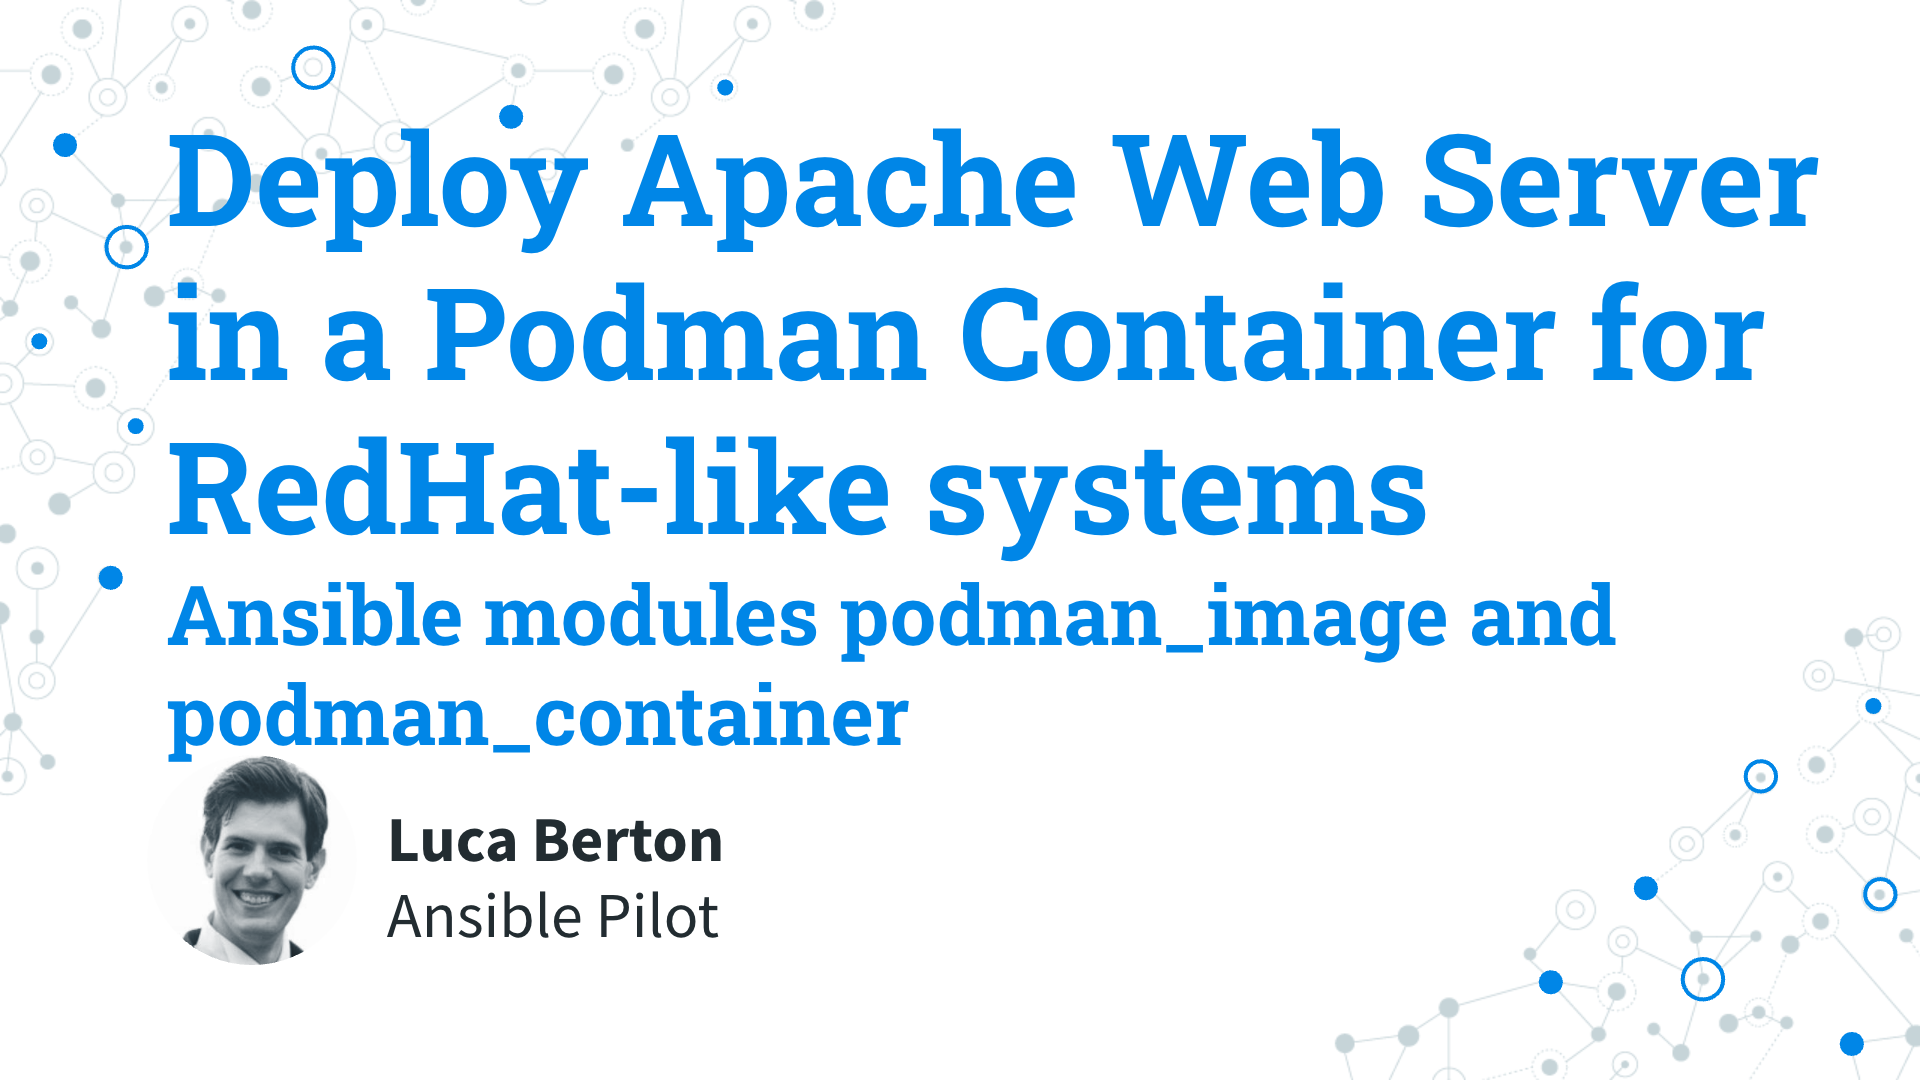 Deploy Apache Web Server in a Podman Container for RedHat-like systems - Ansible modules podman_image and podman_container